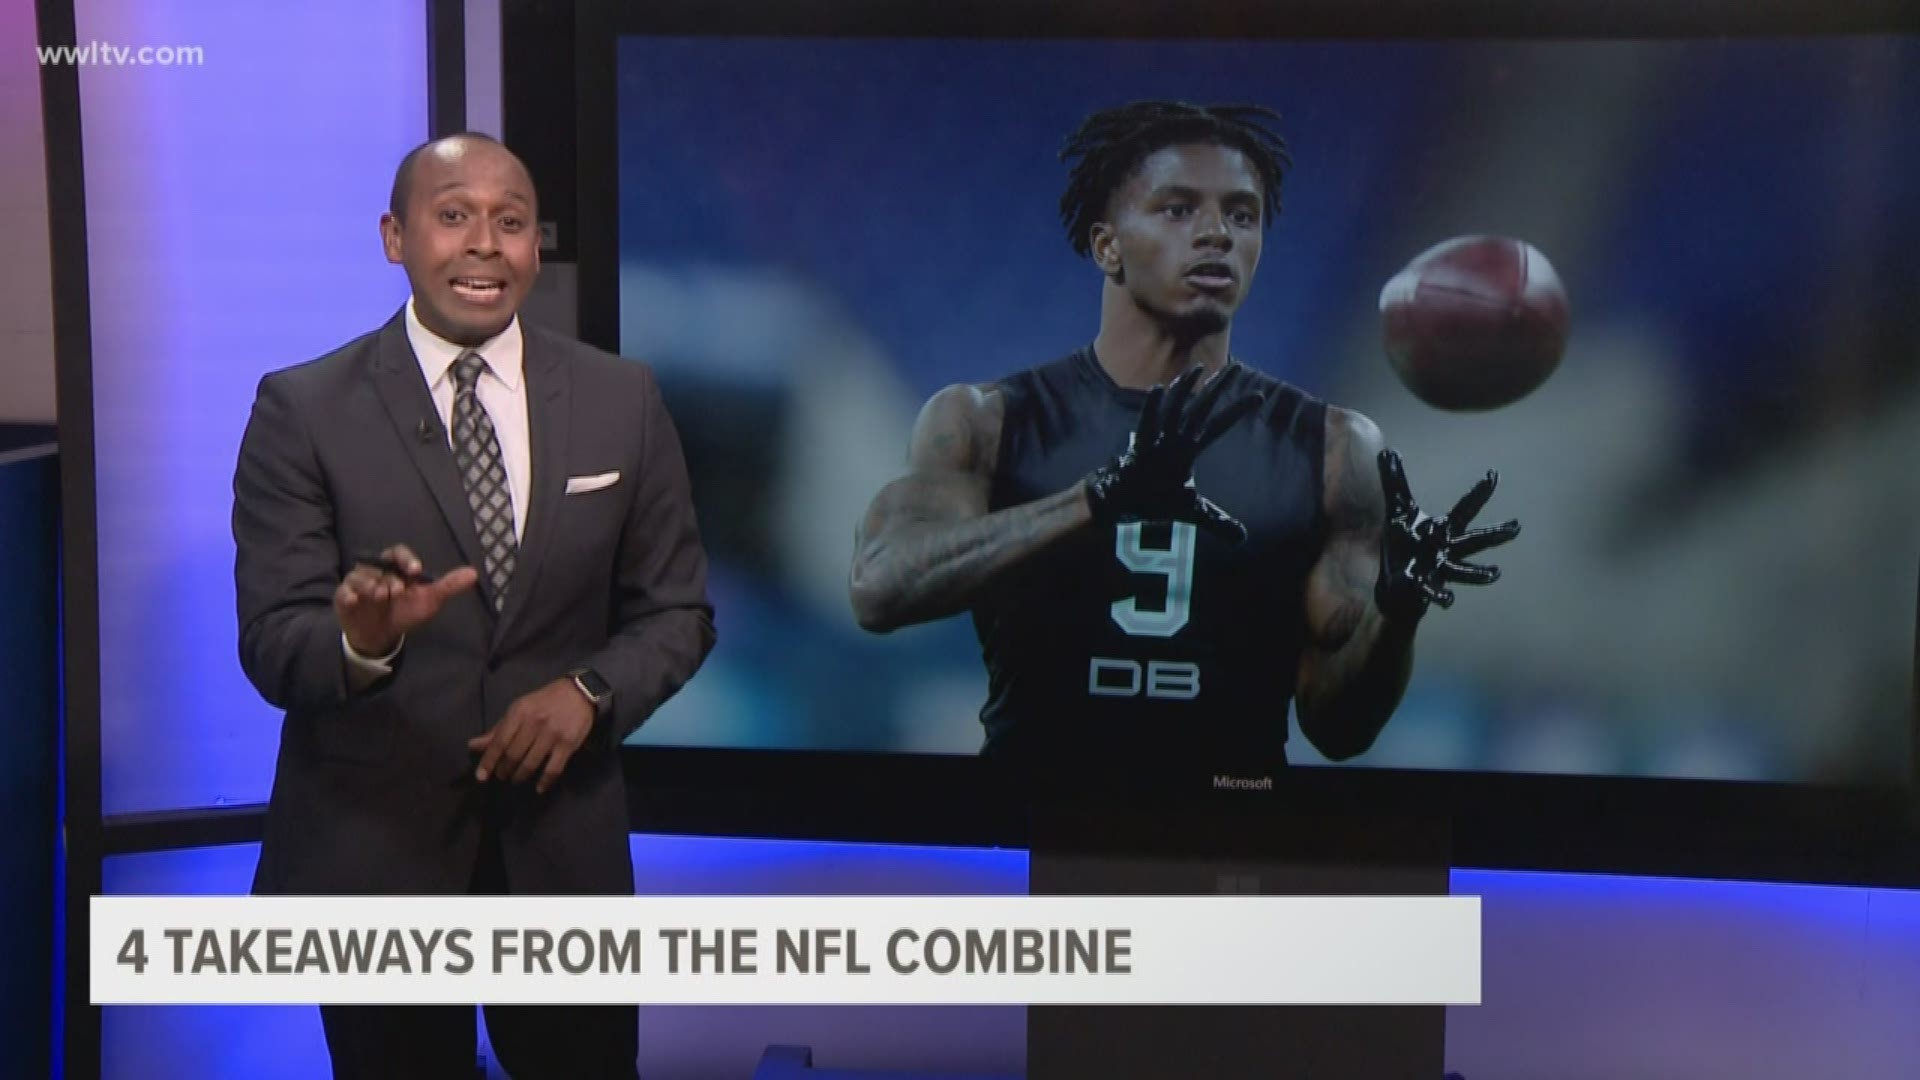 Ricardo LeCompte gives his 4 takes on the NFL combine.